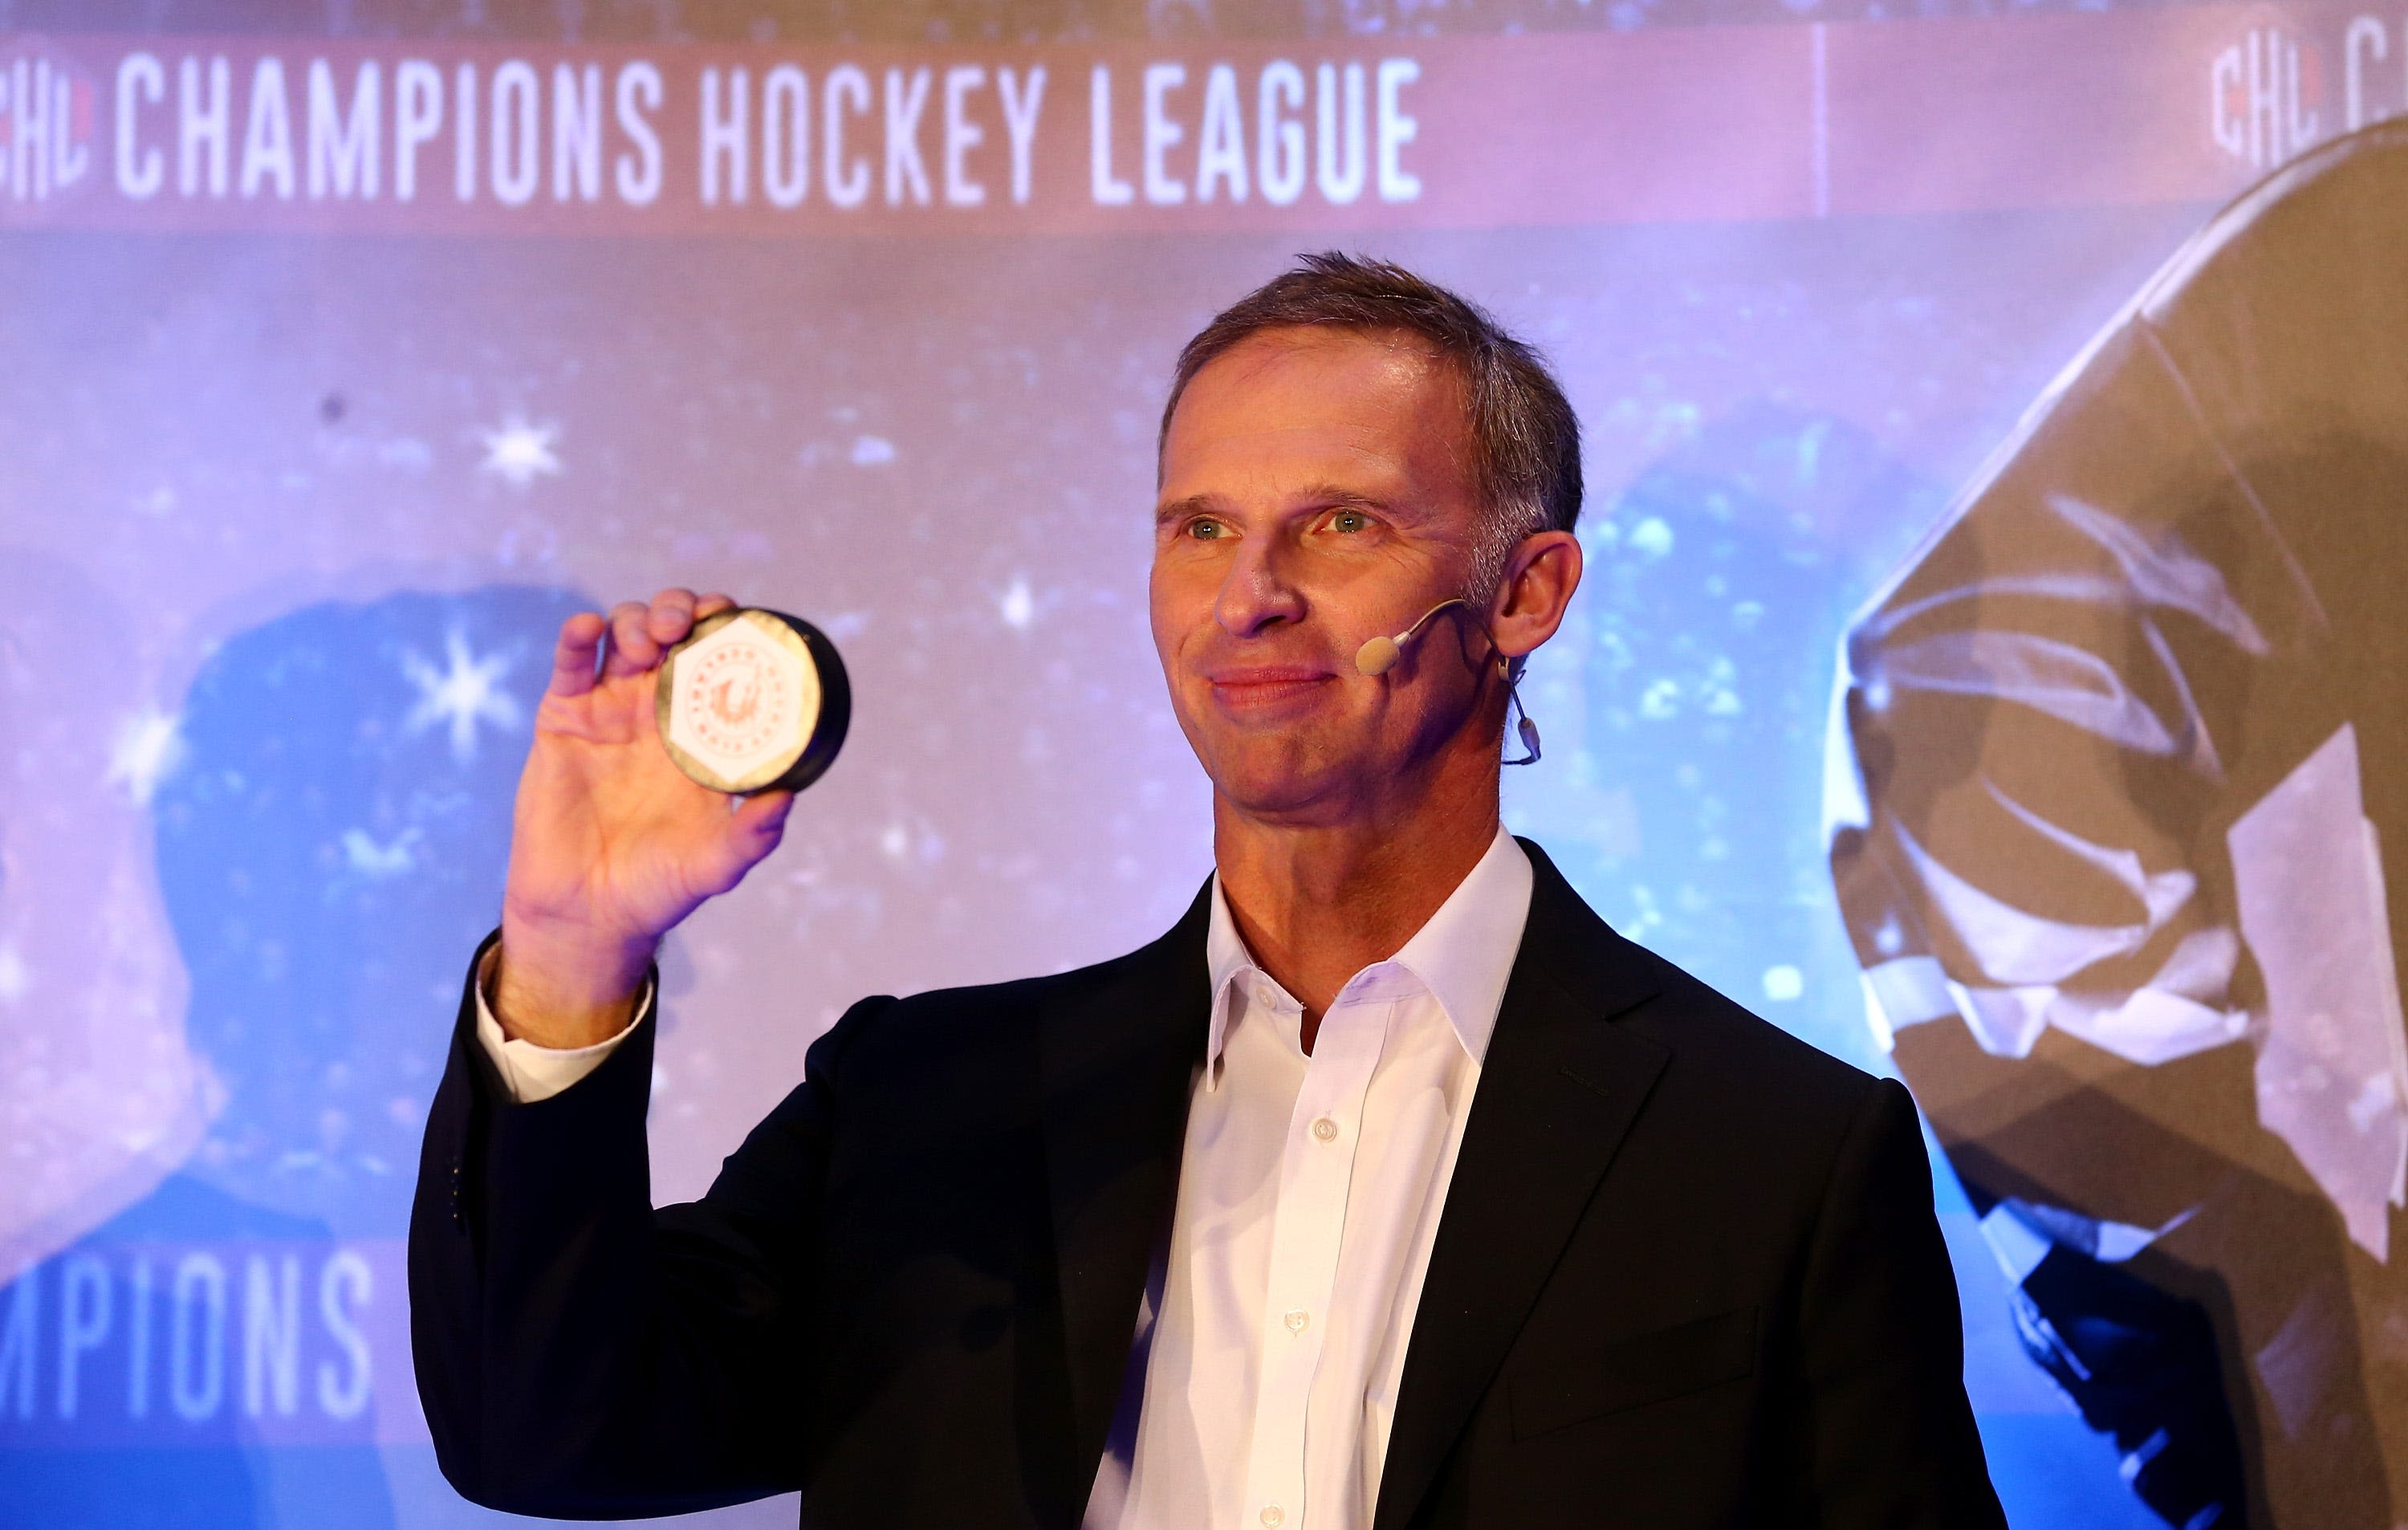 NHL Hall of Famer Hašek says owners should ban Russian athletes during speech in Paris